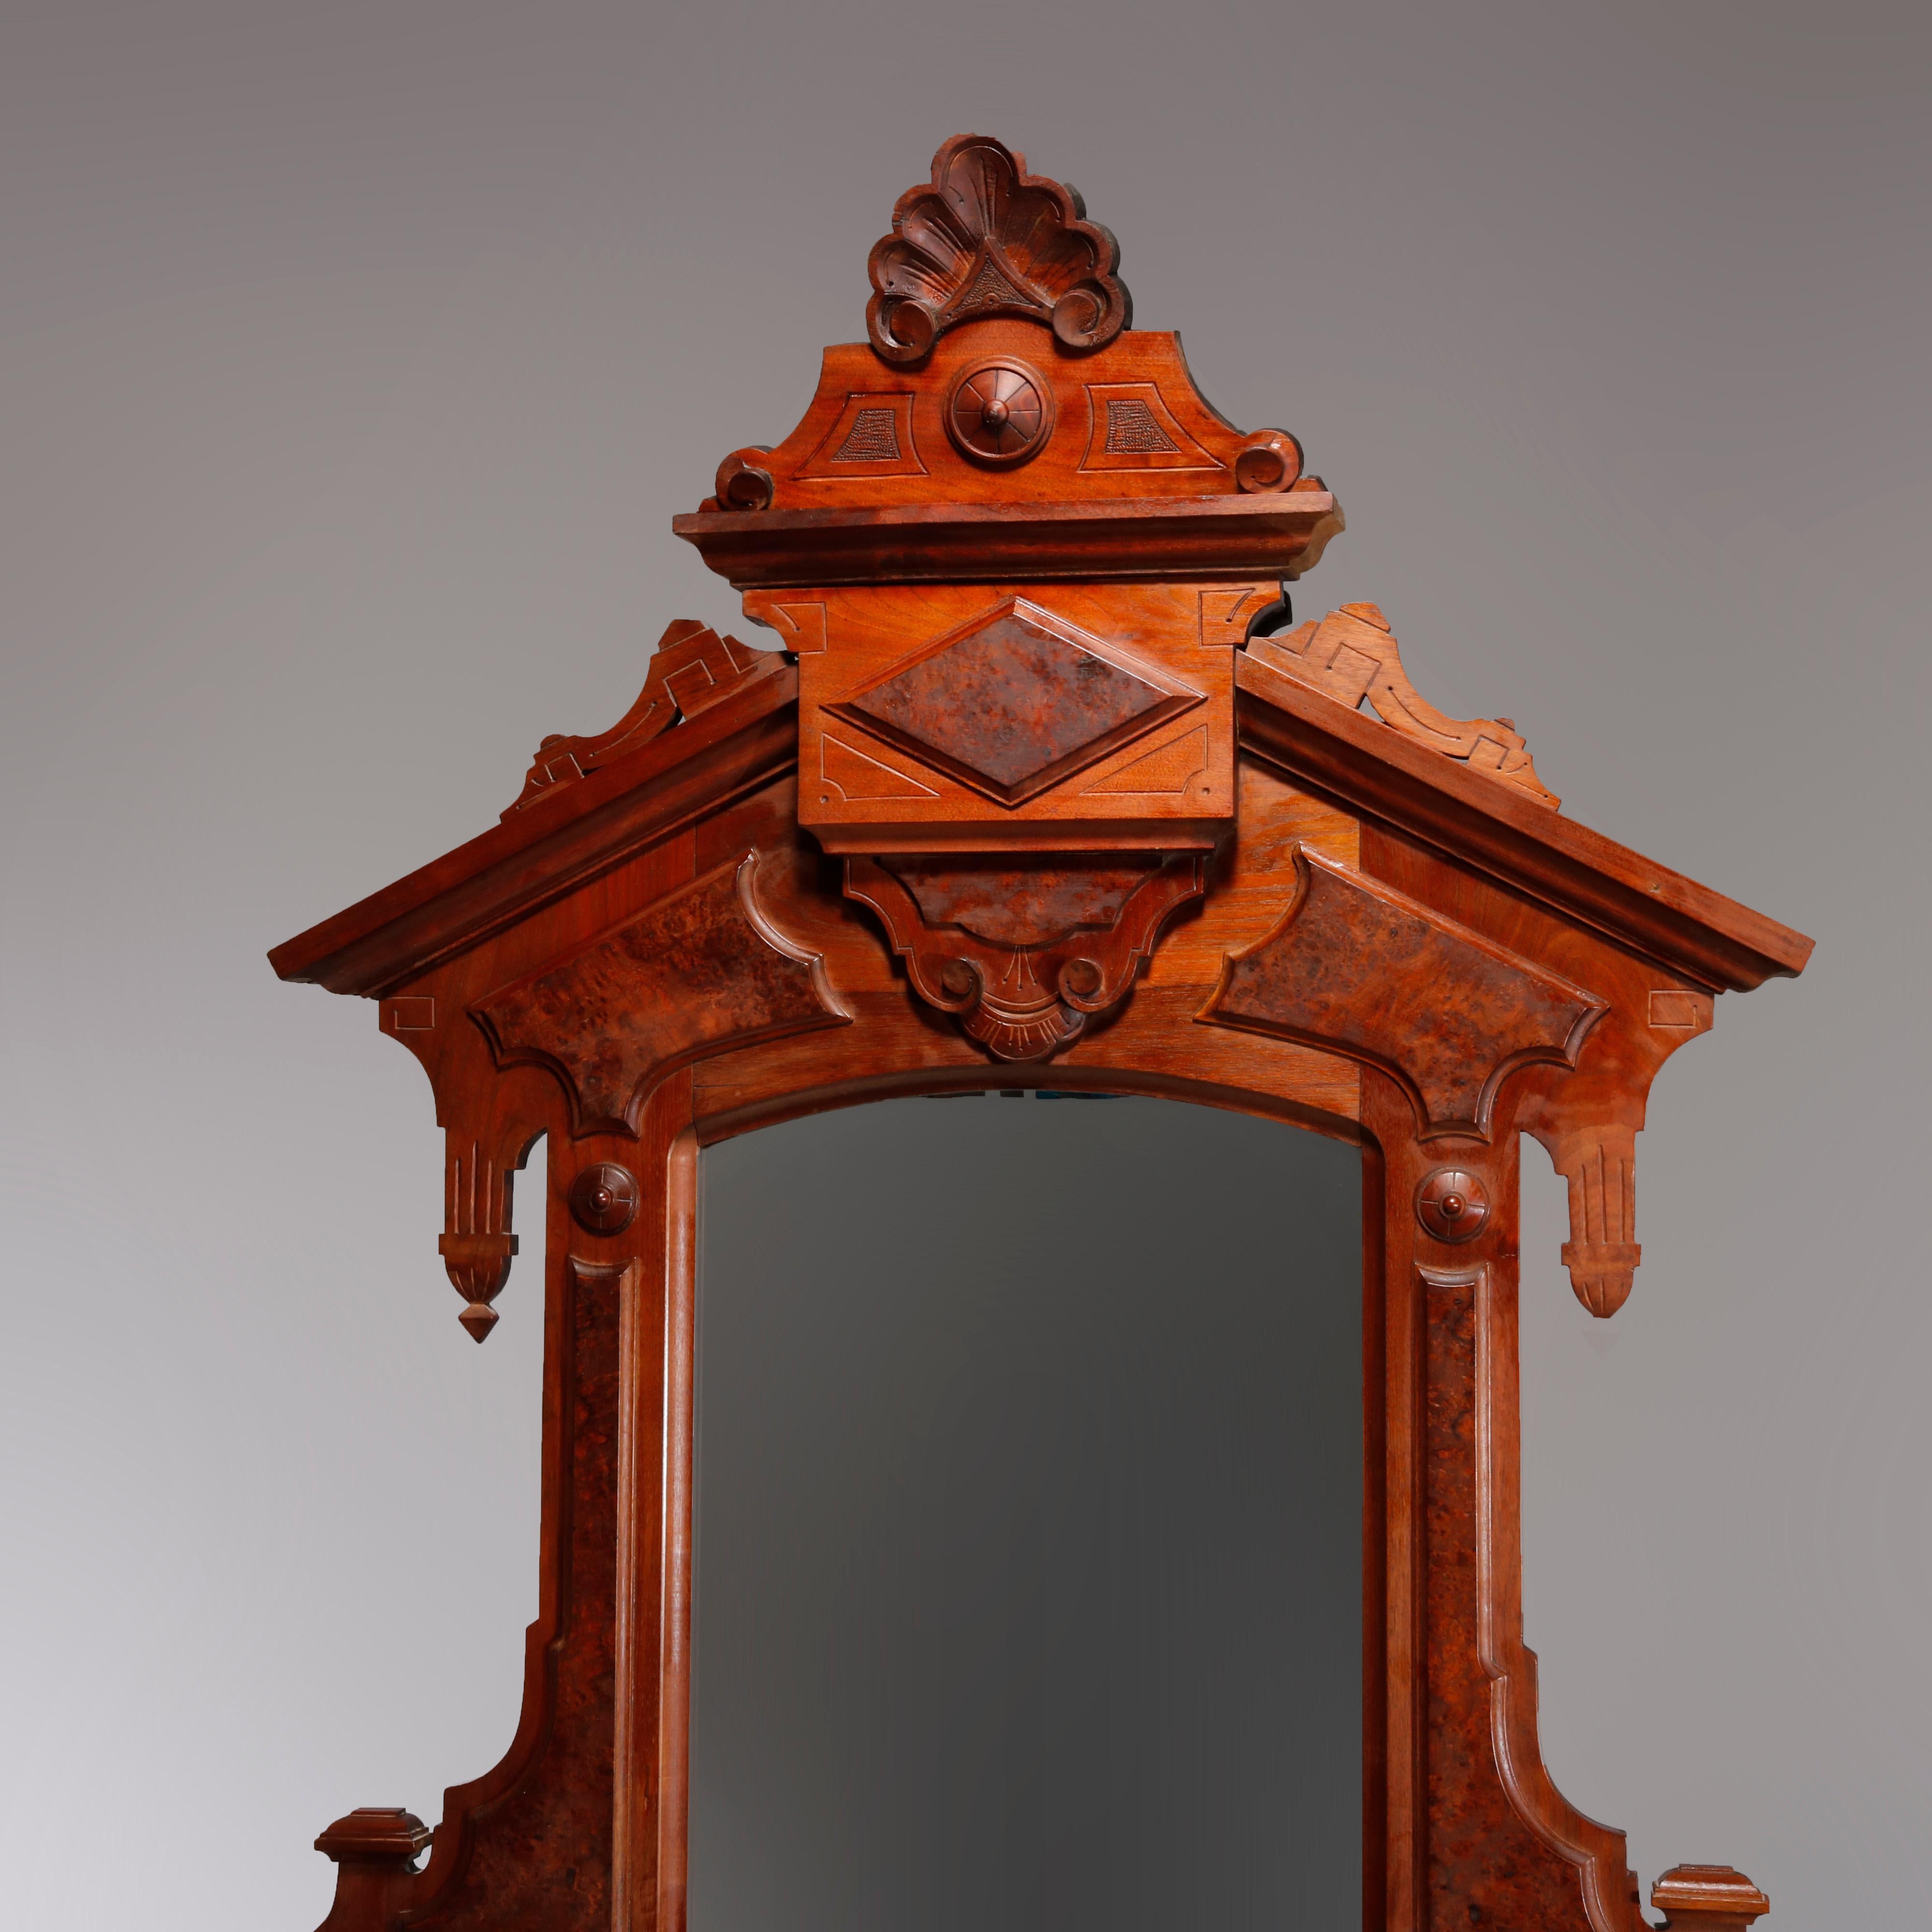 An antique Renaissance Revival dresser offers walnut construction with mirror frame having carved crest with central shell, flanking geometric and incised elements, drop finials, applied burl panels and candle stands surmounting drop center chest of